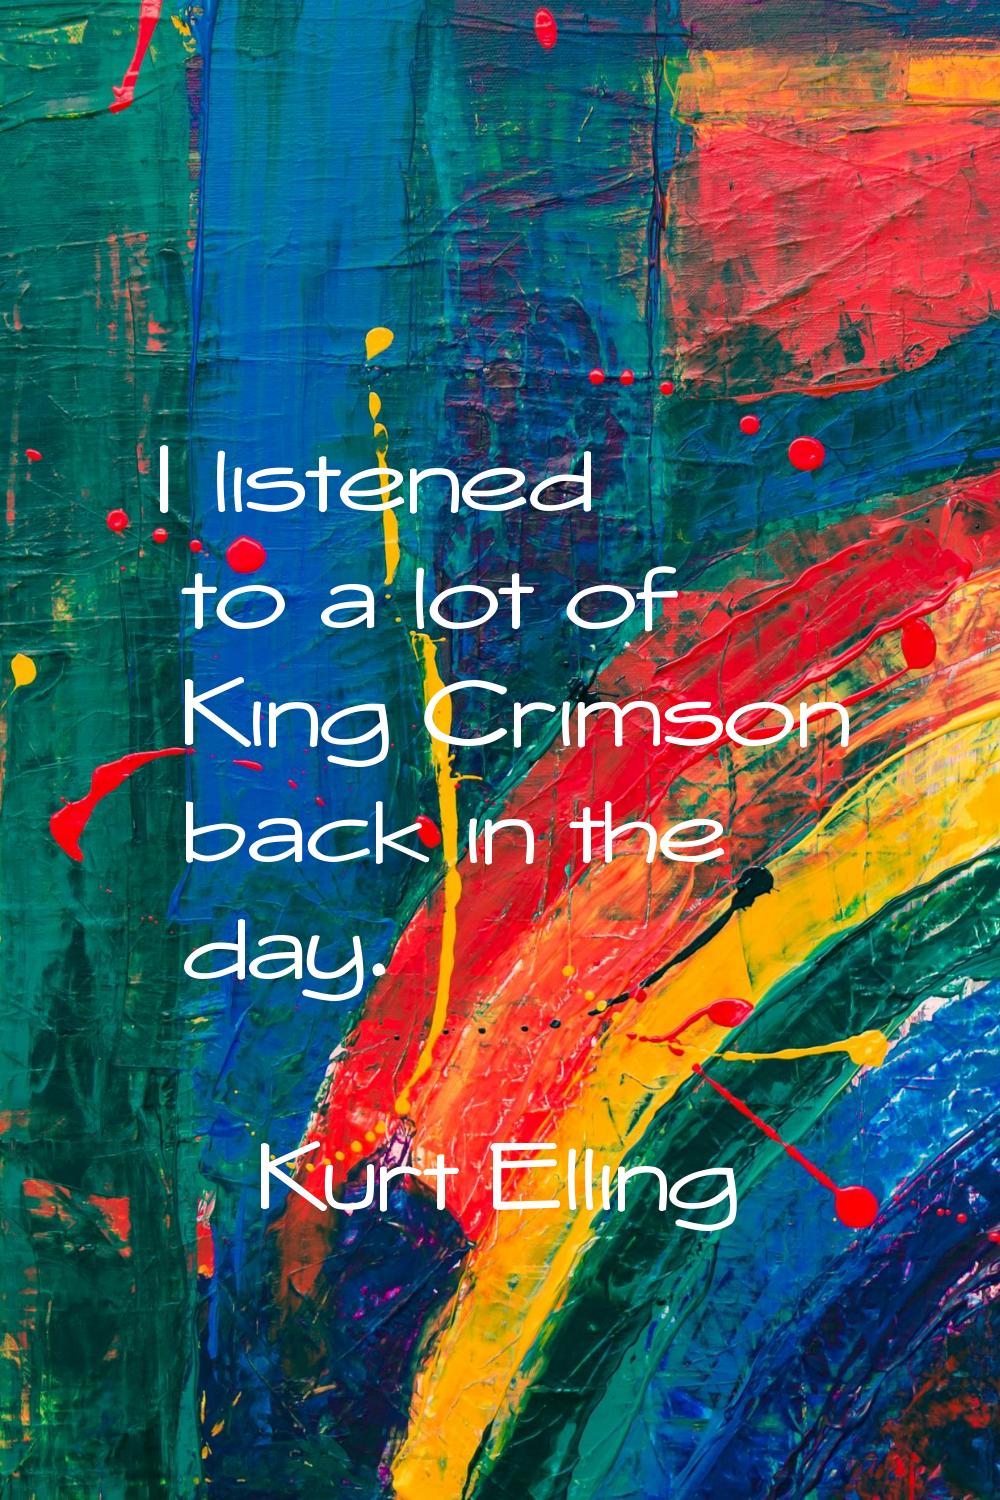 I listened to a lot of King Crimson back in the day.